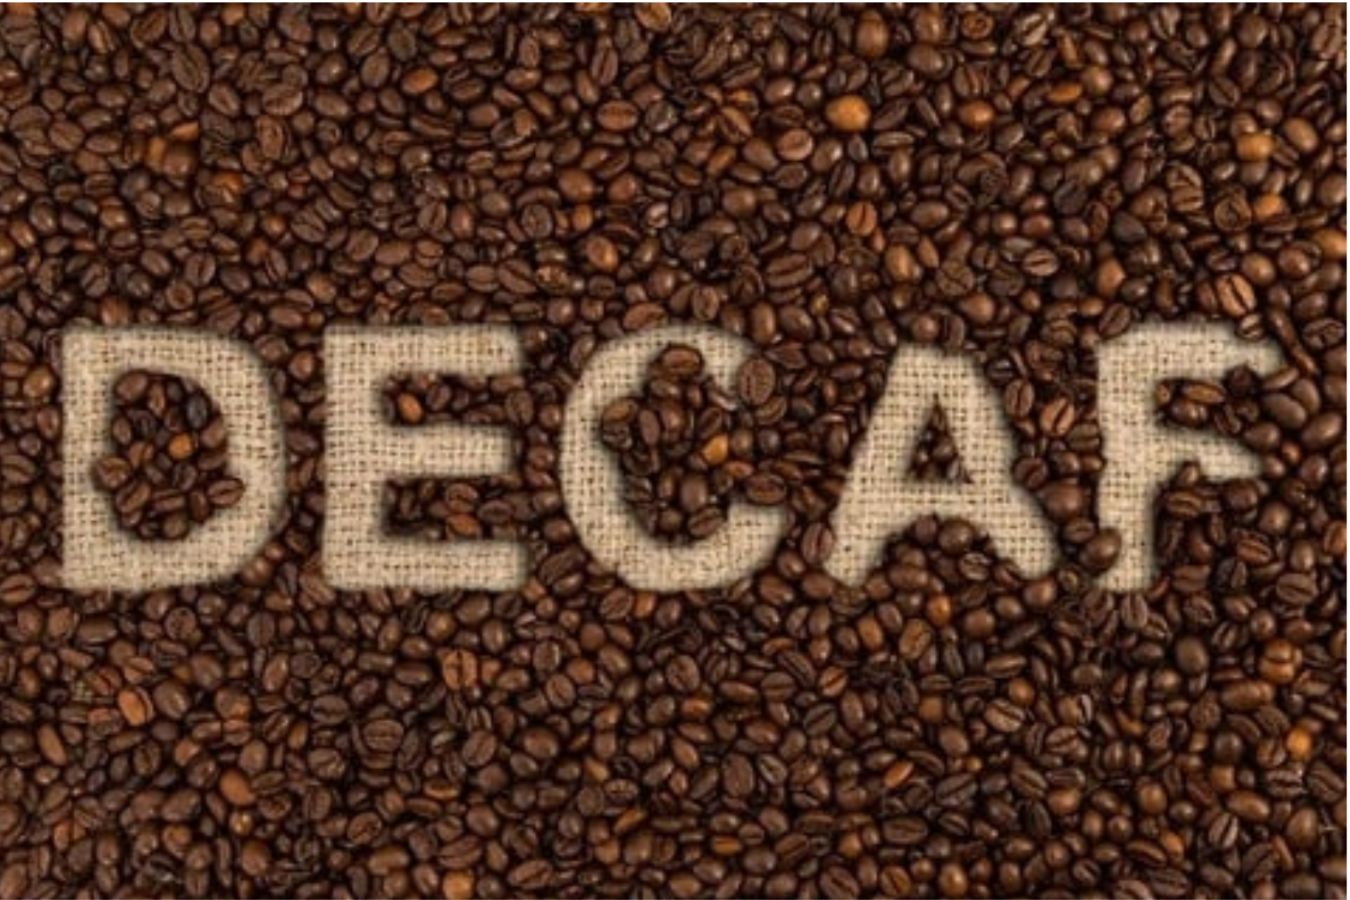 Decaffeination Processes In Decaf Coffee